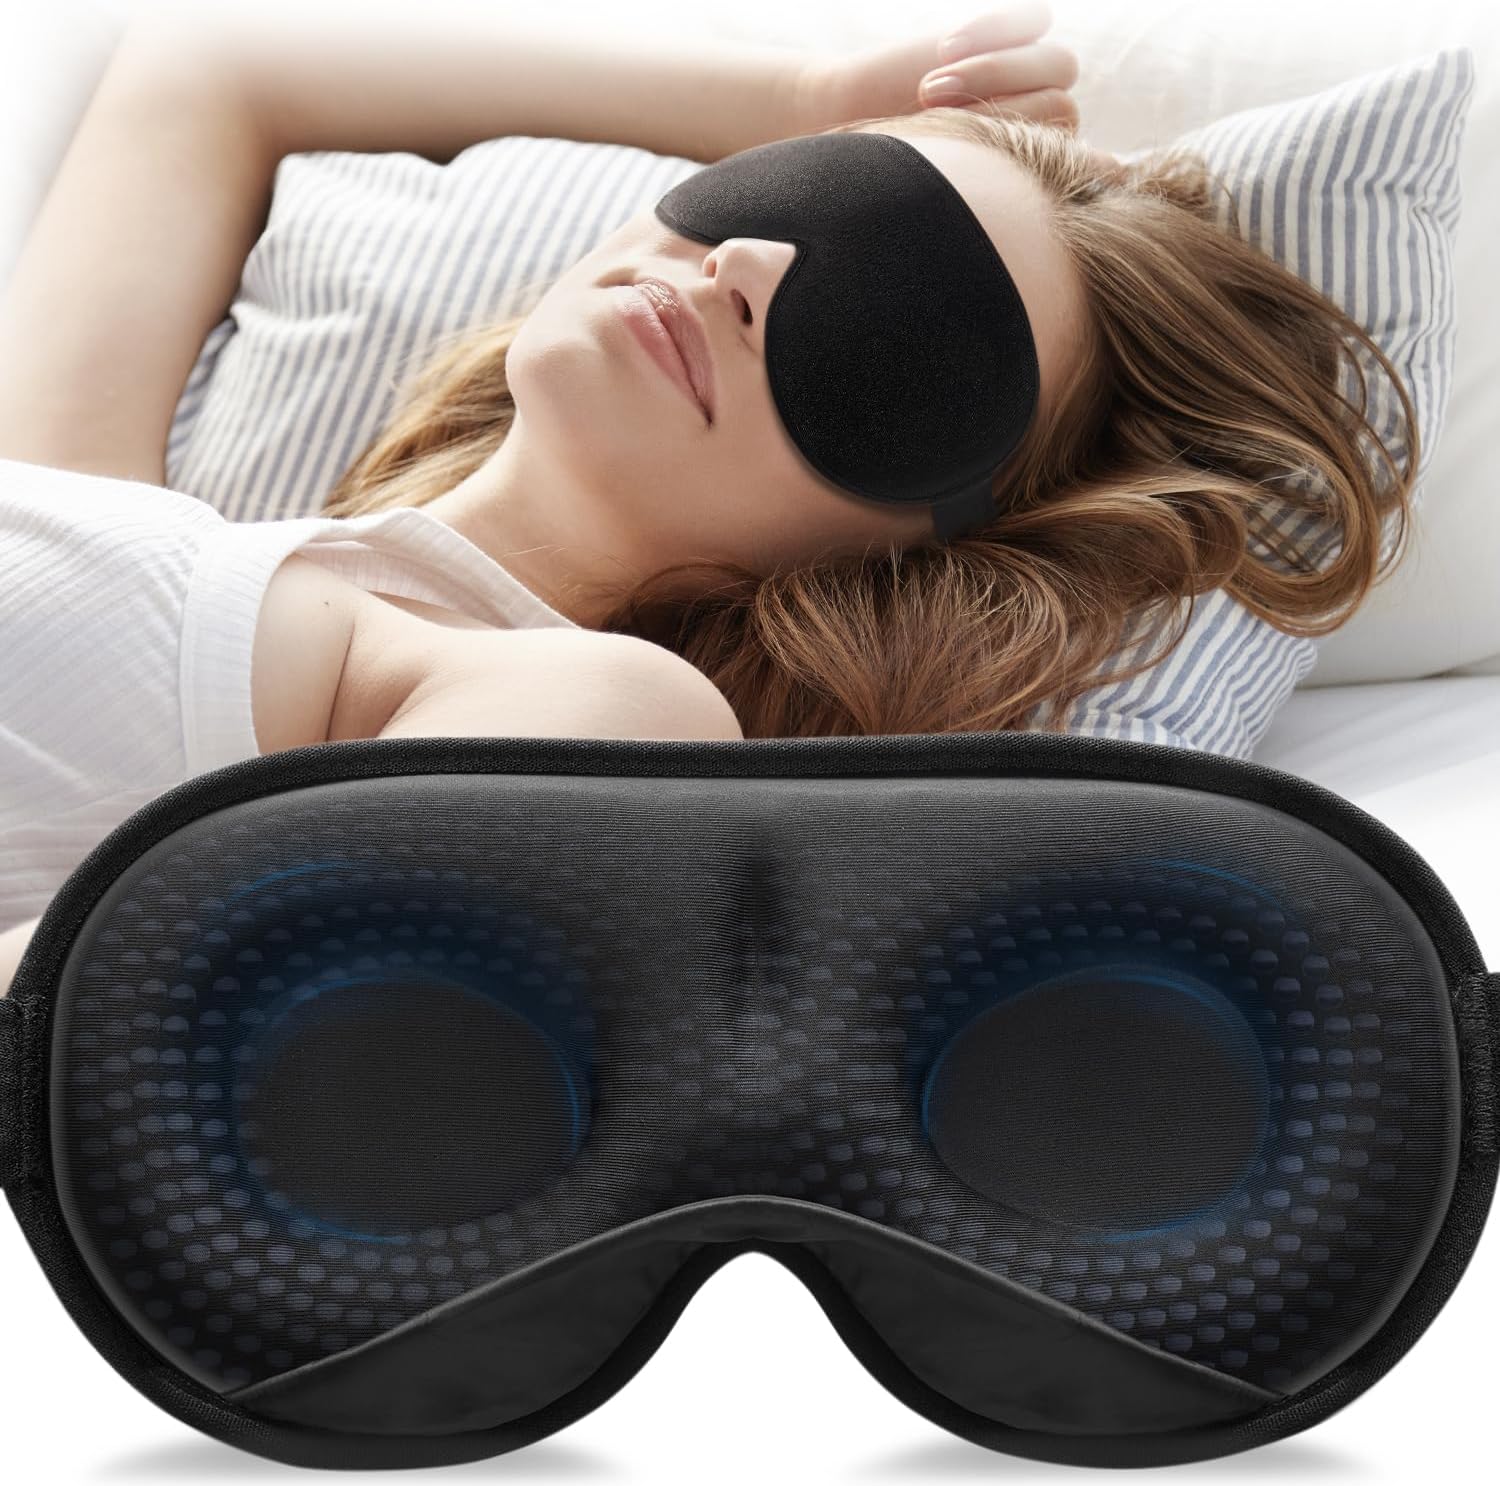 I recently upgraded my sleep routine with the FONG Weighted Sleep Mask, and it has been a game-changer in achieving a restful night' sleep. Here' why this 3D contoured sleep mask has become an essential part of my nightly ritual:**1. Weighted Bliss:**The addition of gentle weight to the sleep mask provides a soothing and calming sensation. It creates a subtle pressure that helps to alleviate tension and promotes relaxation, contributing to a deeper sleep experience.**2. 3D Contoured Design:**T